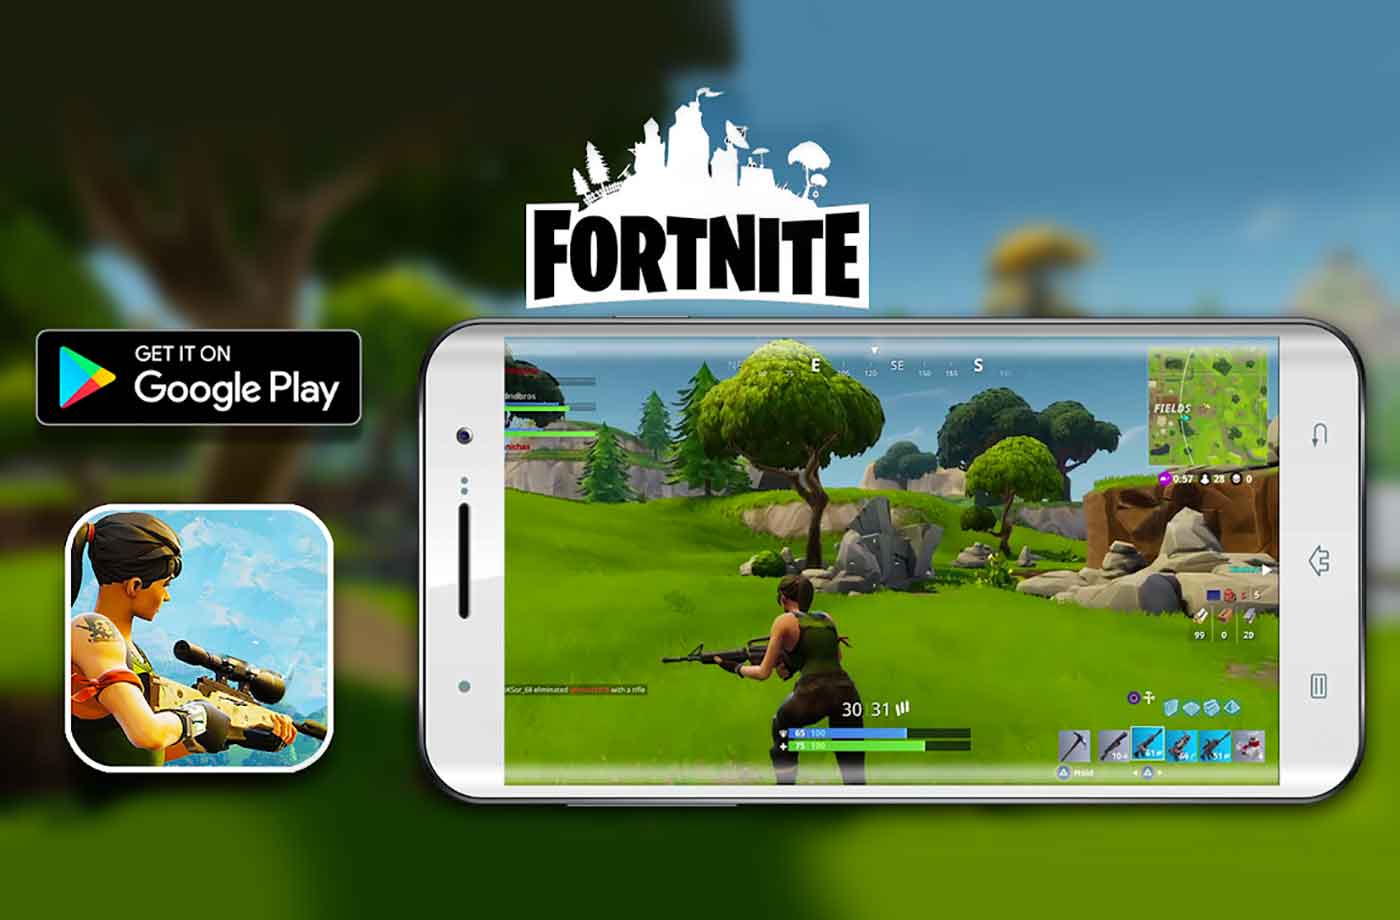 Where can I get fortnite android apk game apk for free windows 10 ...